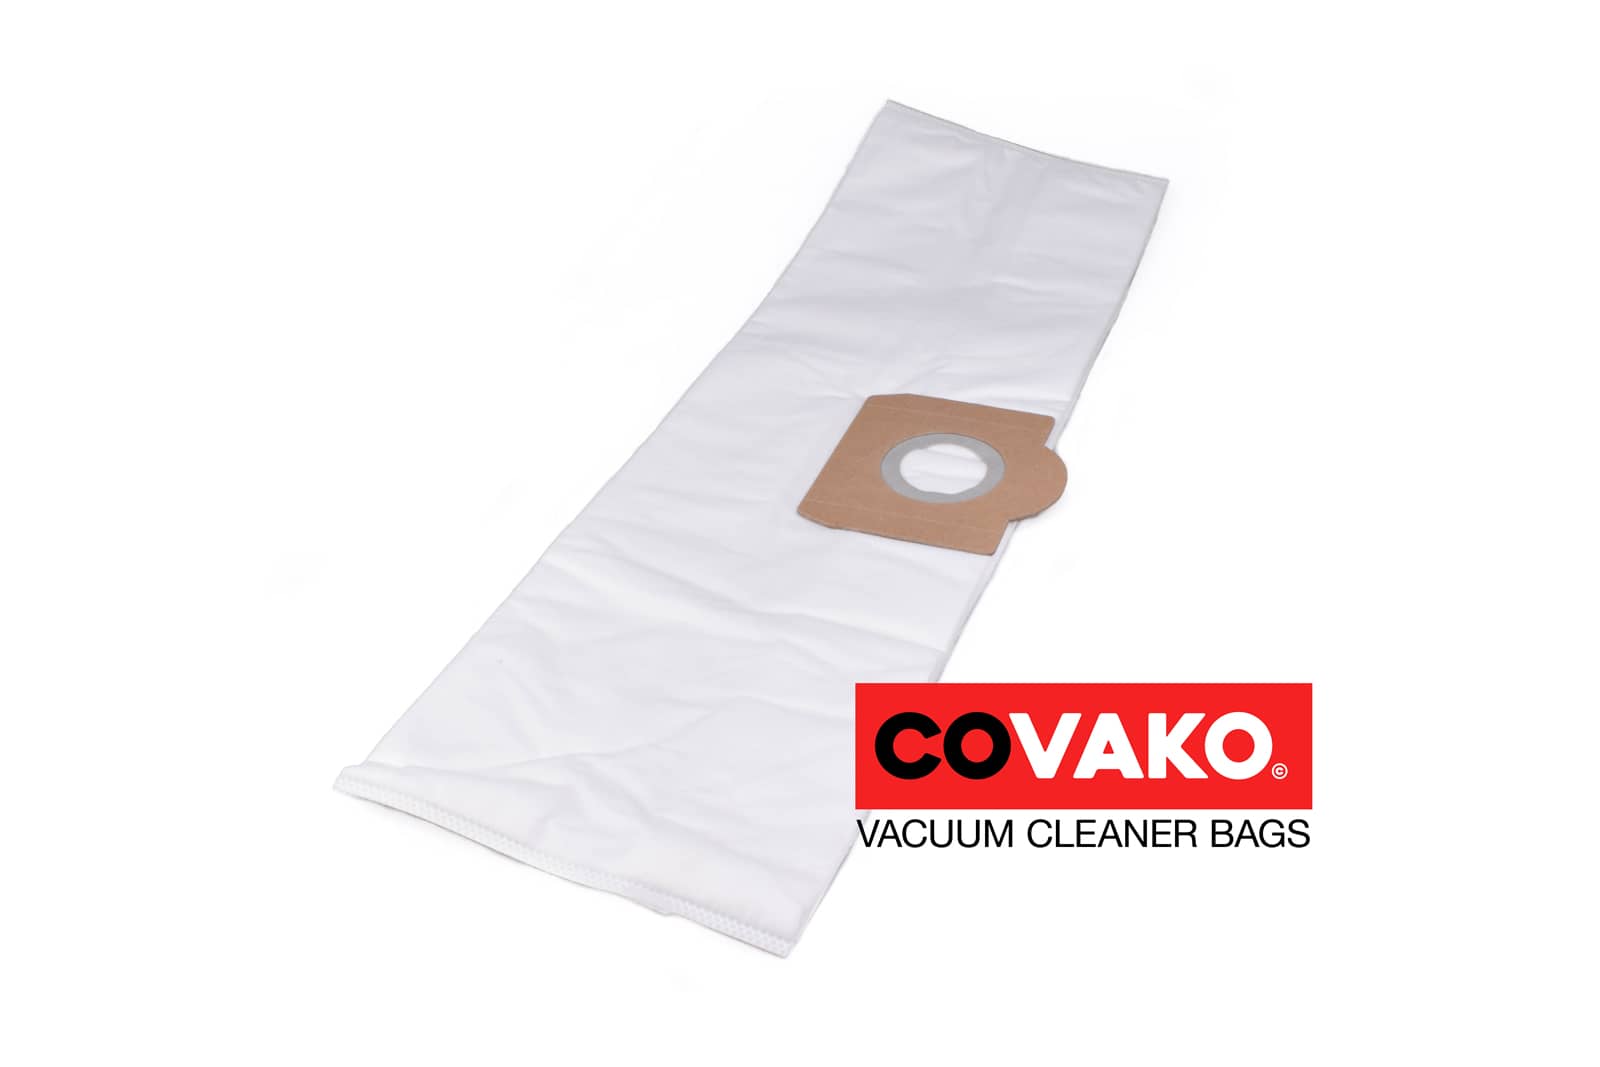 Omega Rio Serie / Synthesis - Omega vacuum cleaner bags